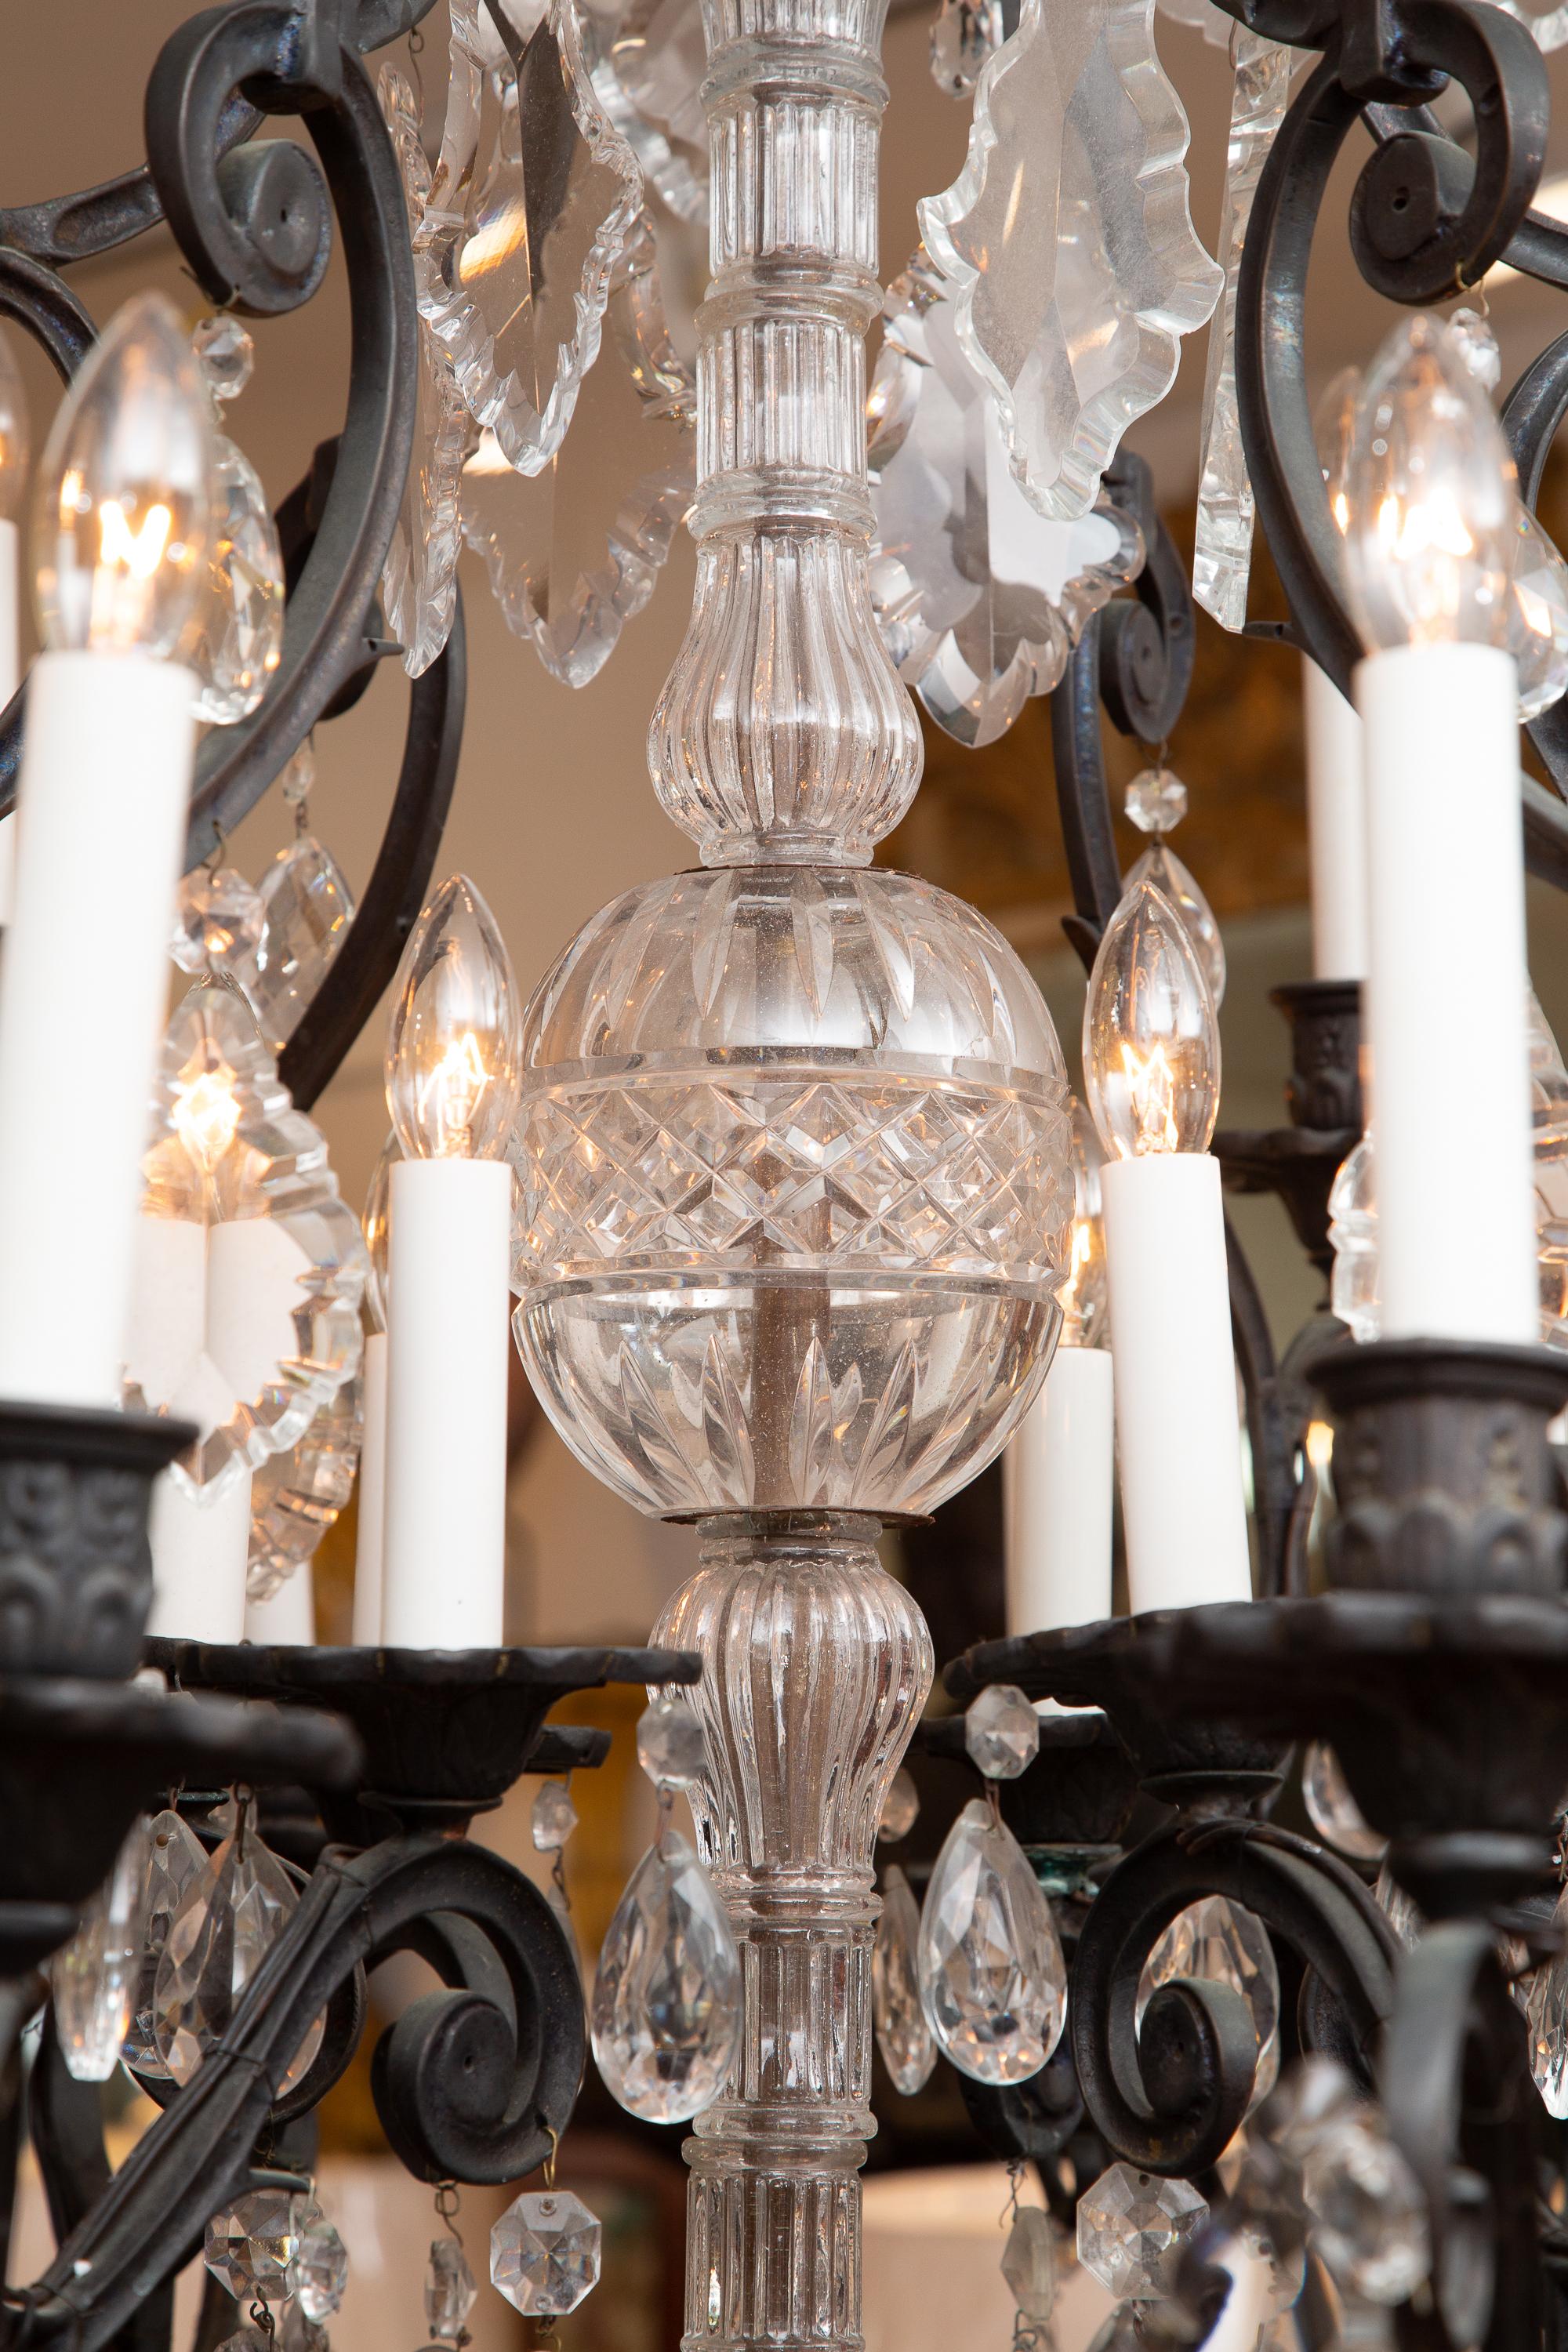 This is a large scale 30 light iron birdcage style chandelier with overall cut crystals and prisms.